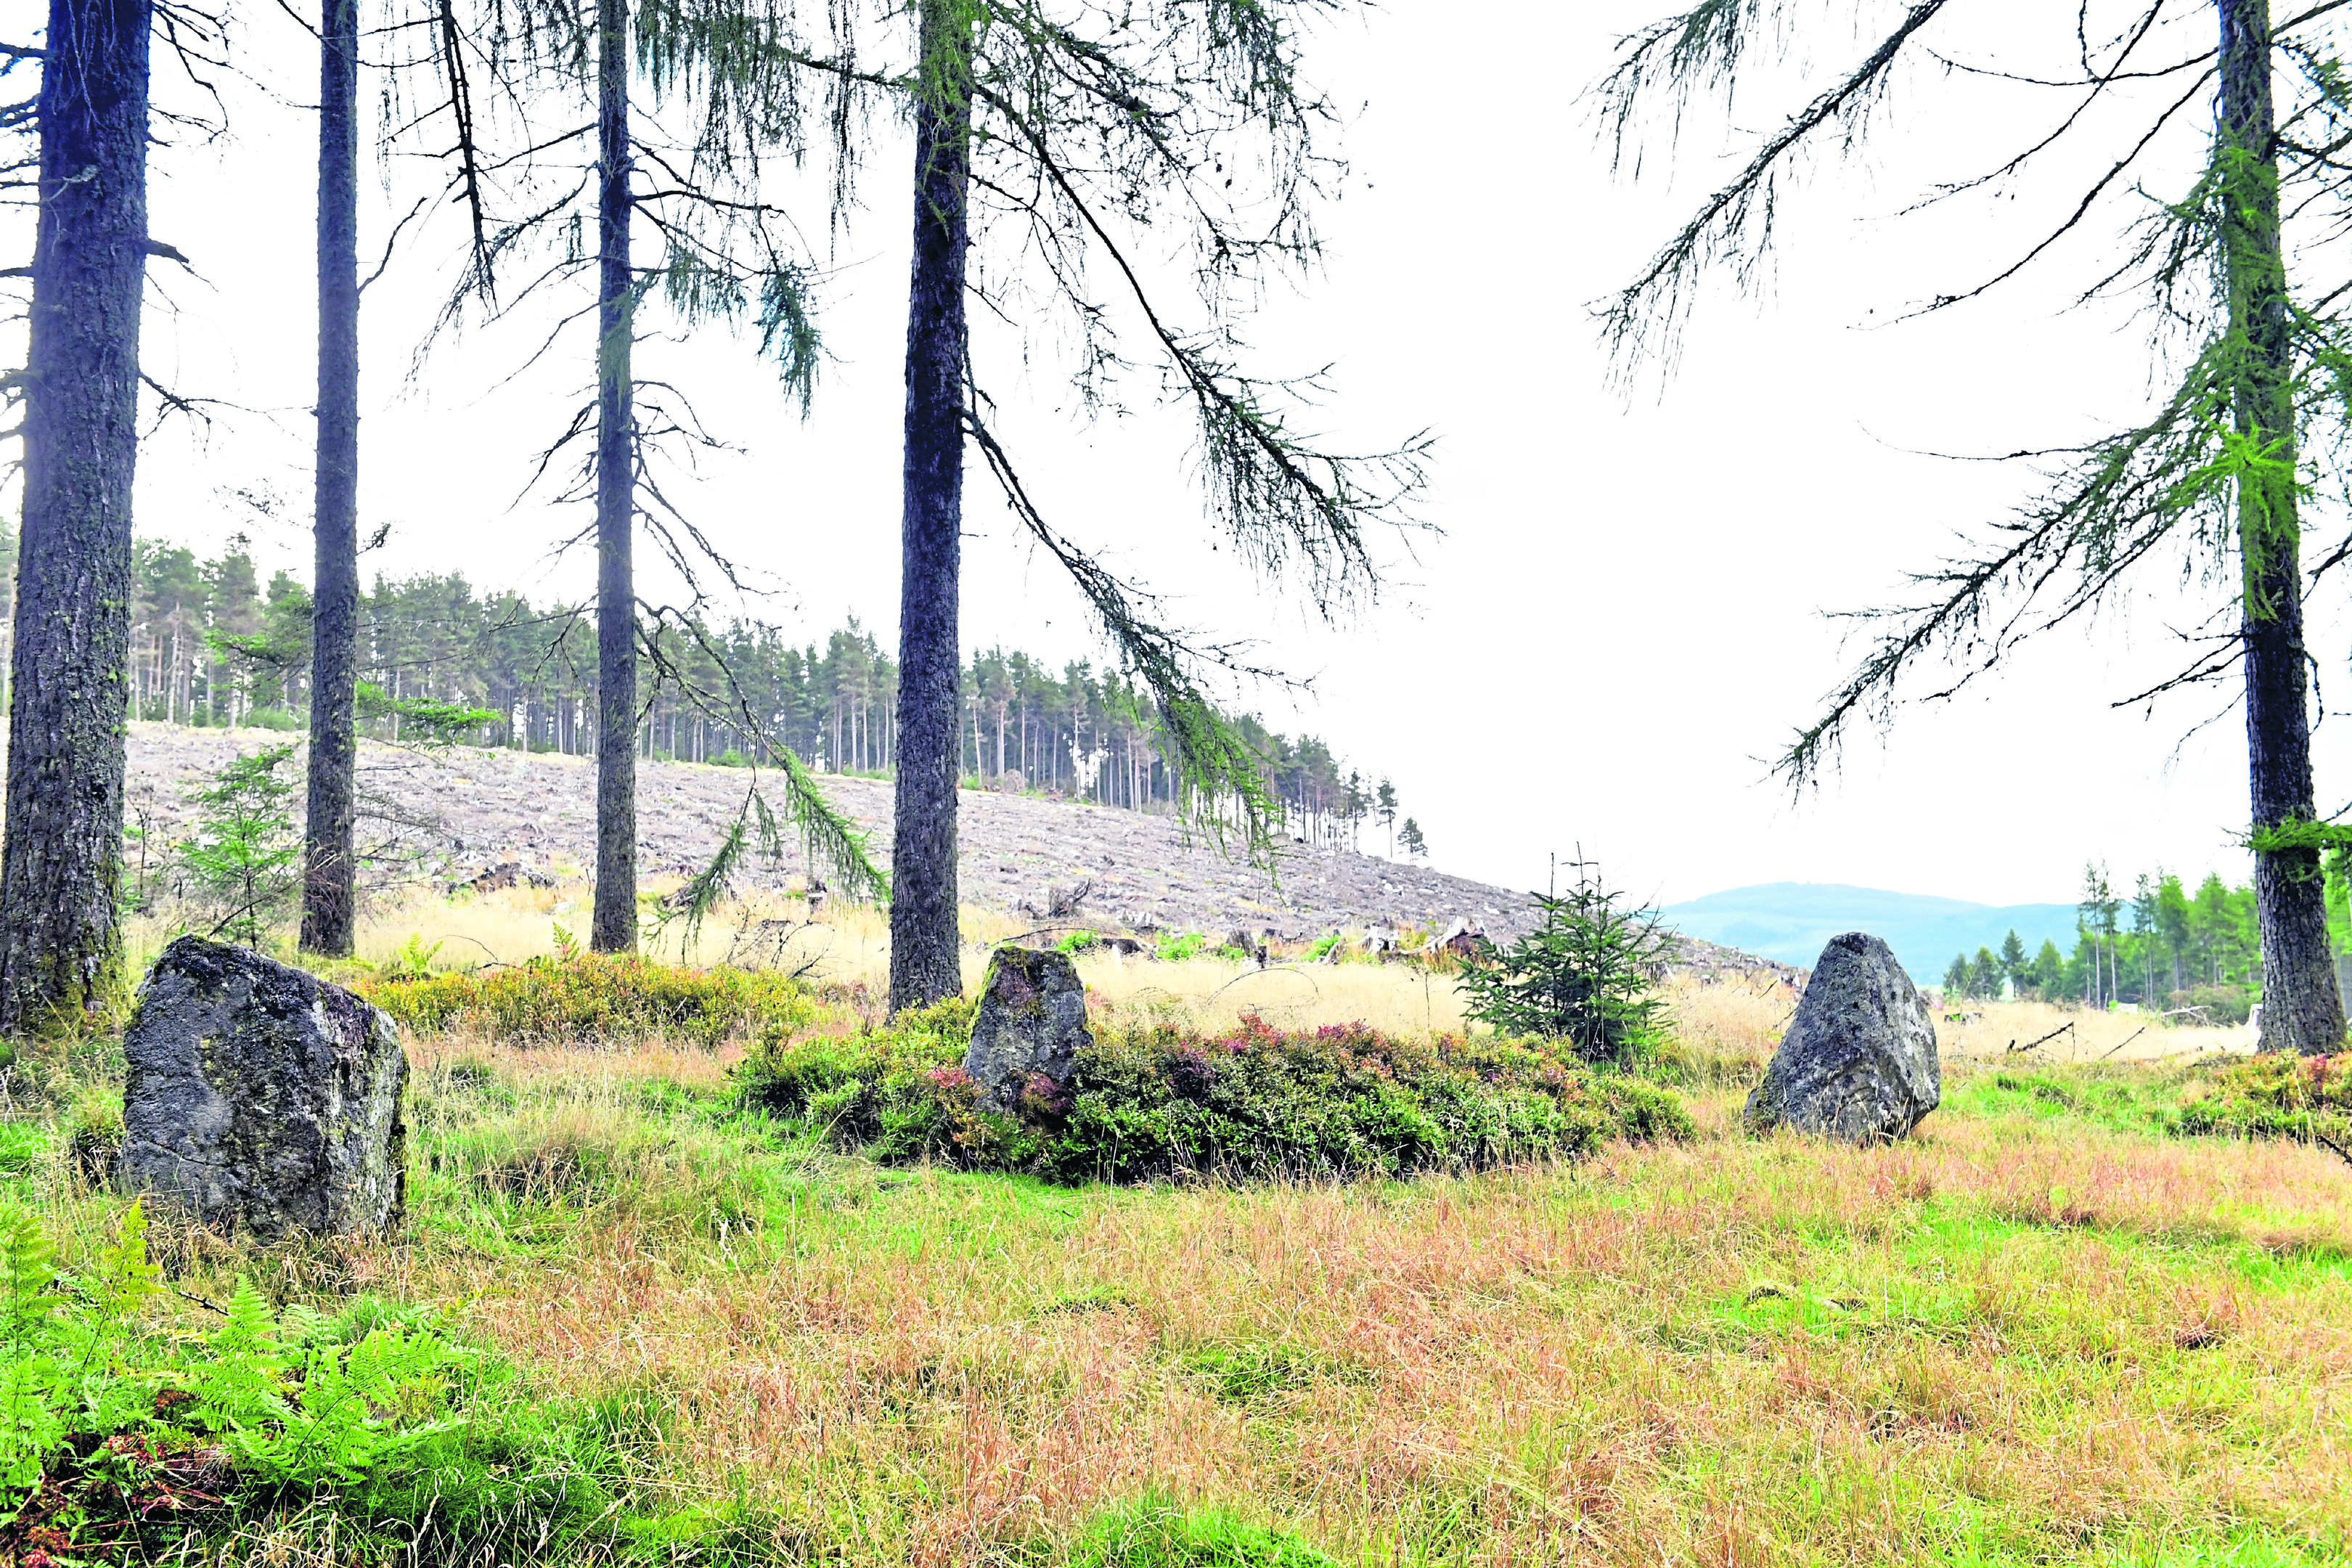 Mulloch Stone Circle at Banchory, where it has been reported that there has been fly tipping.